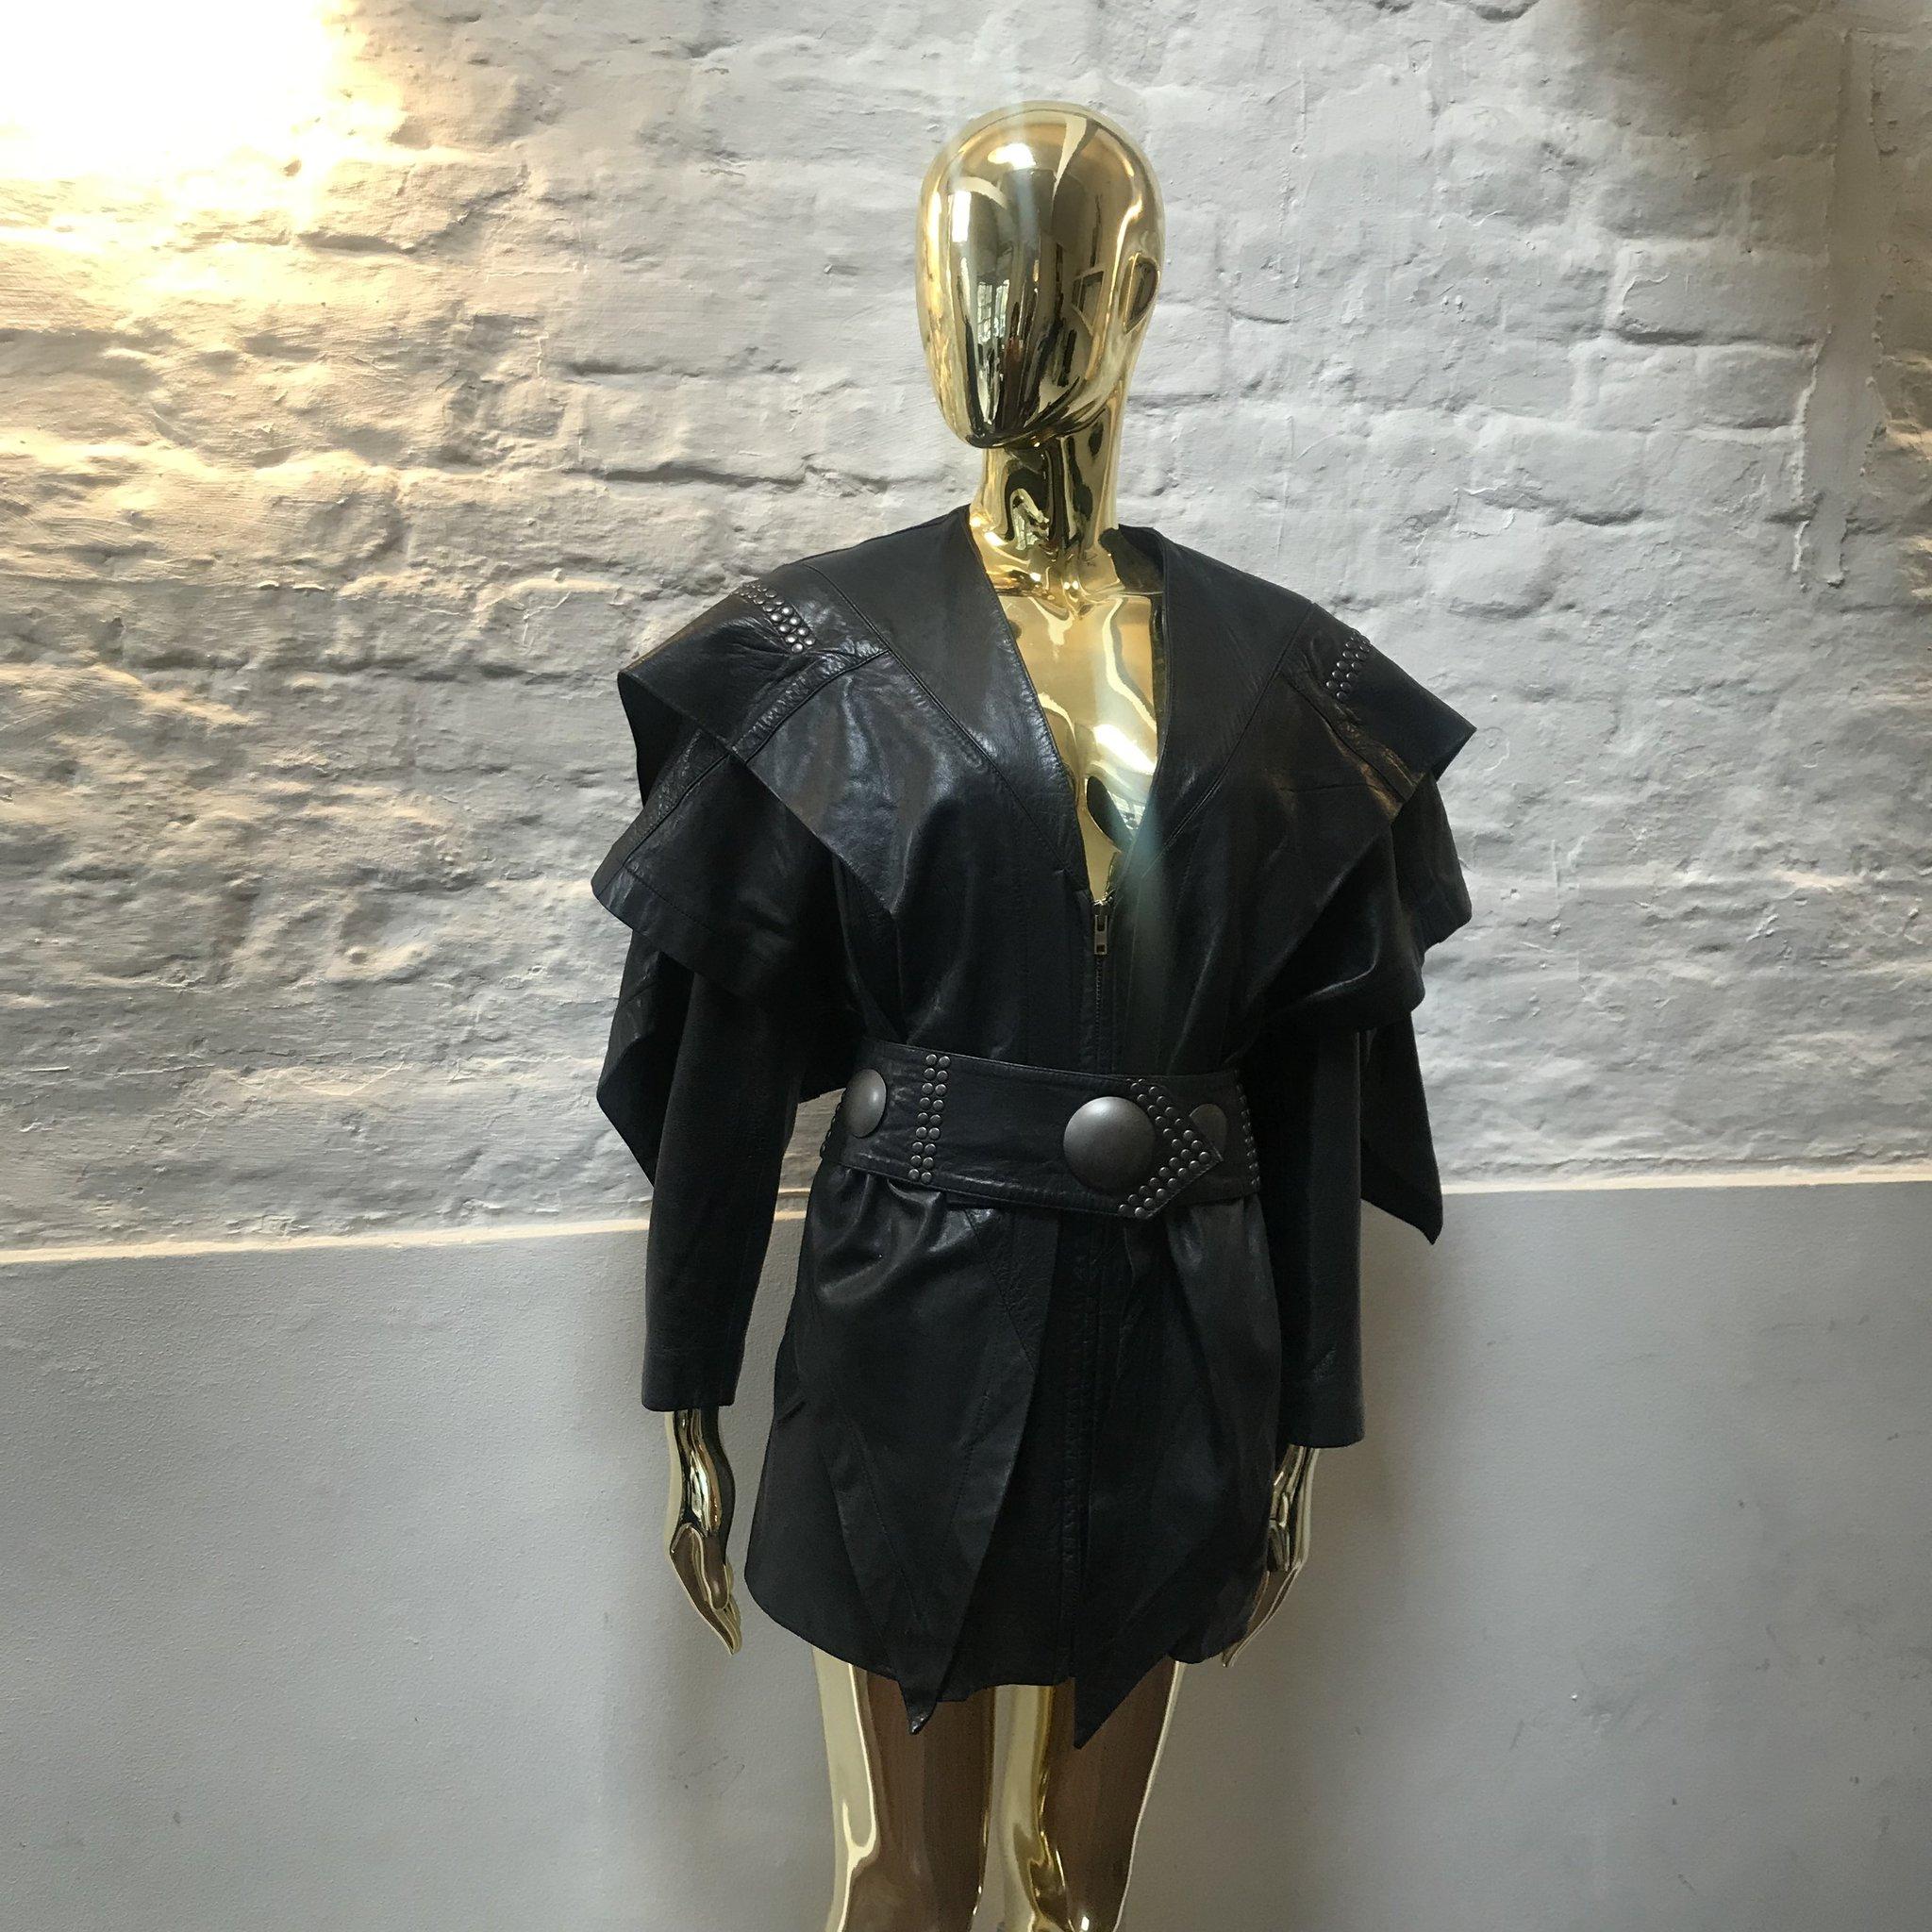 Issey Miyake Leather Belt Dress made in Japan.

Issey Miyake's first collection was launched in New York in 1971, and began to be shown in Paris Fashion Week from Autumn Winter 1973.

From the very beginning to this day, Issey Miyake's design has